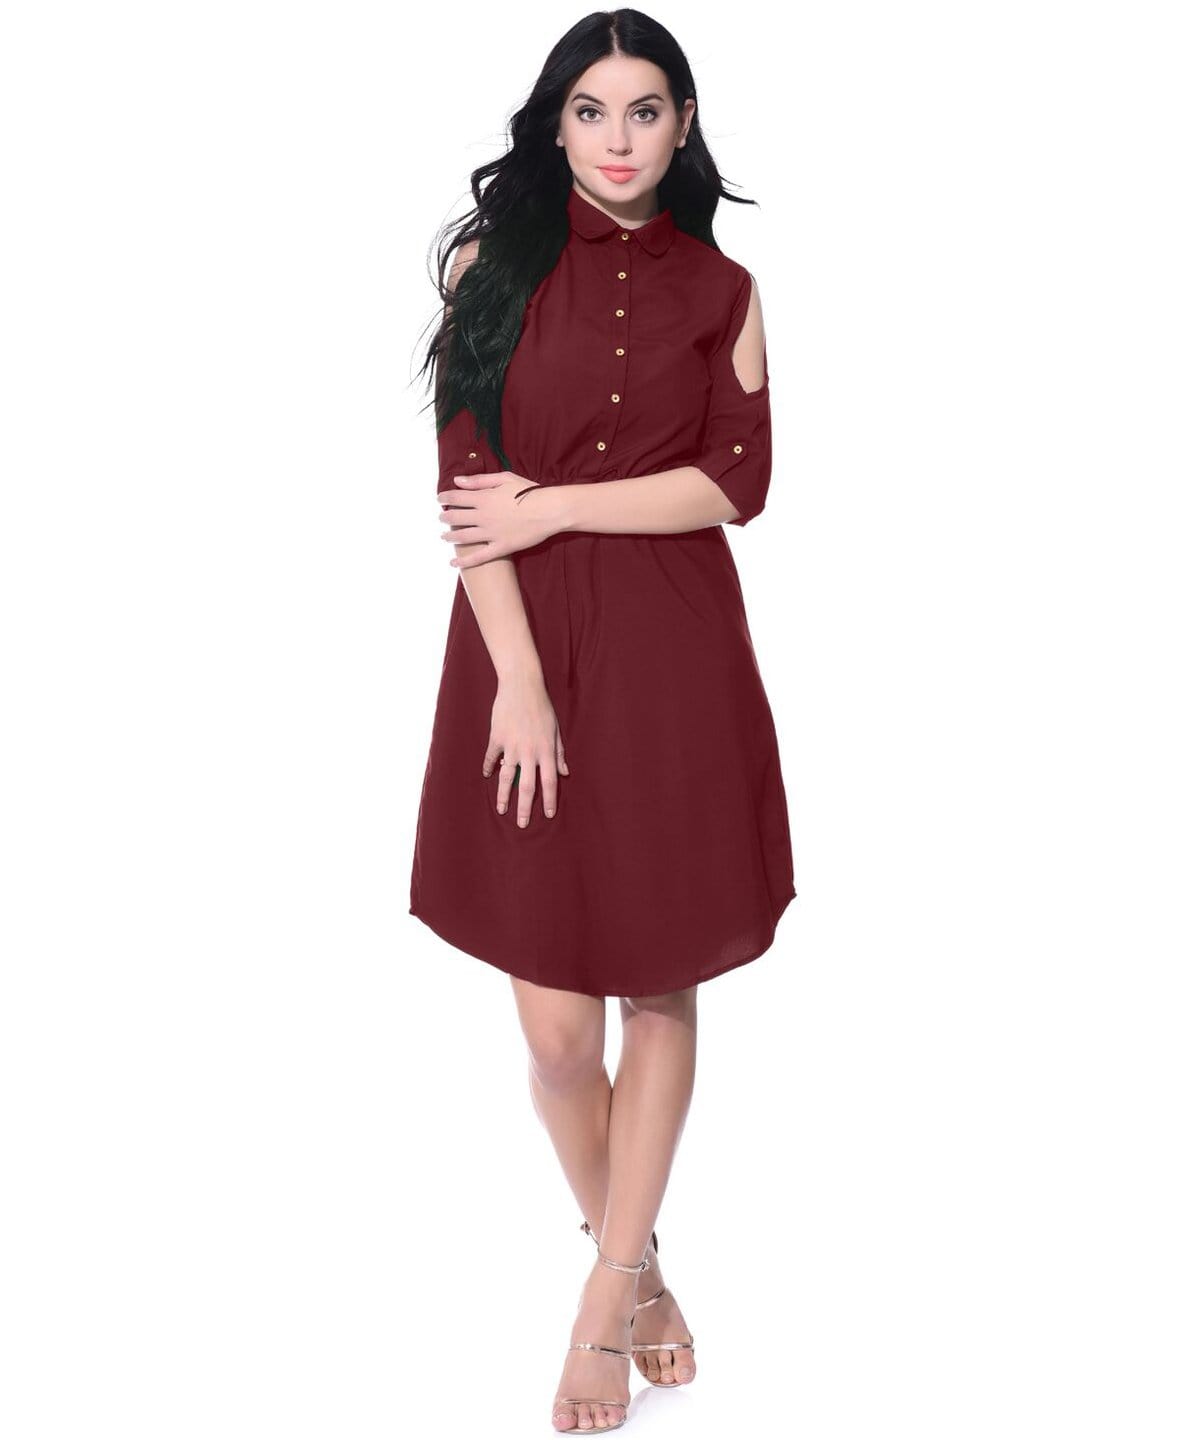 Solid Maroon Cold Shoulder Collared Dress - Uptownie